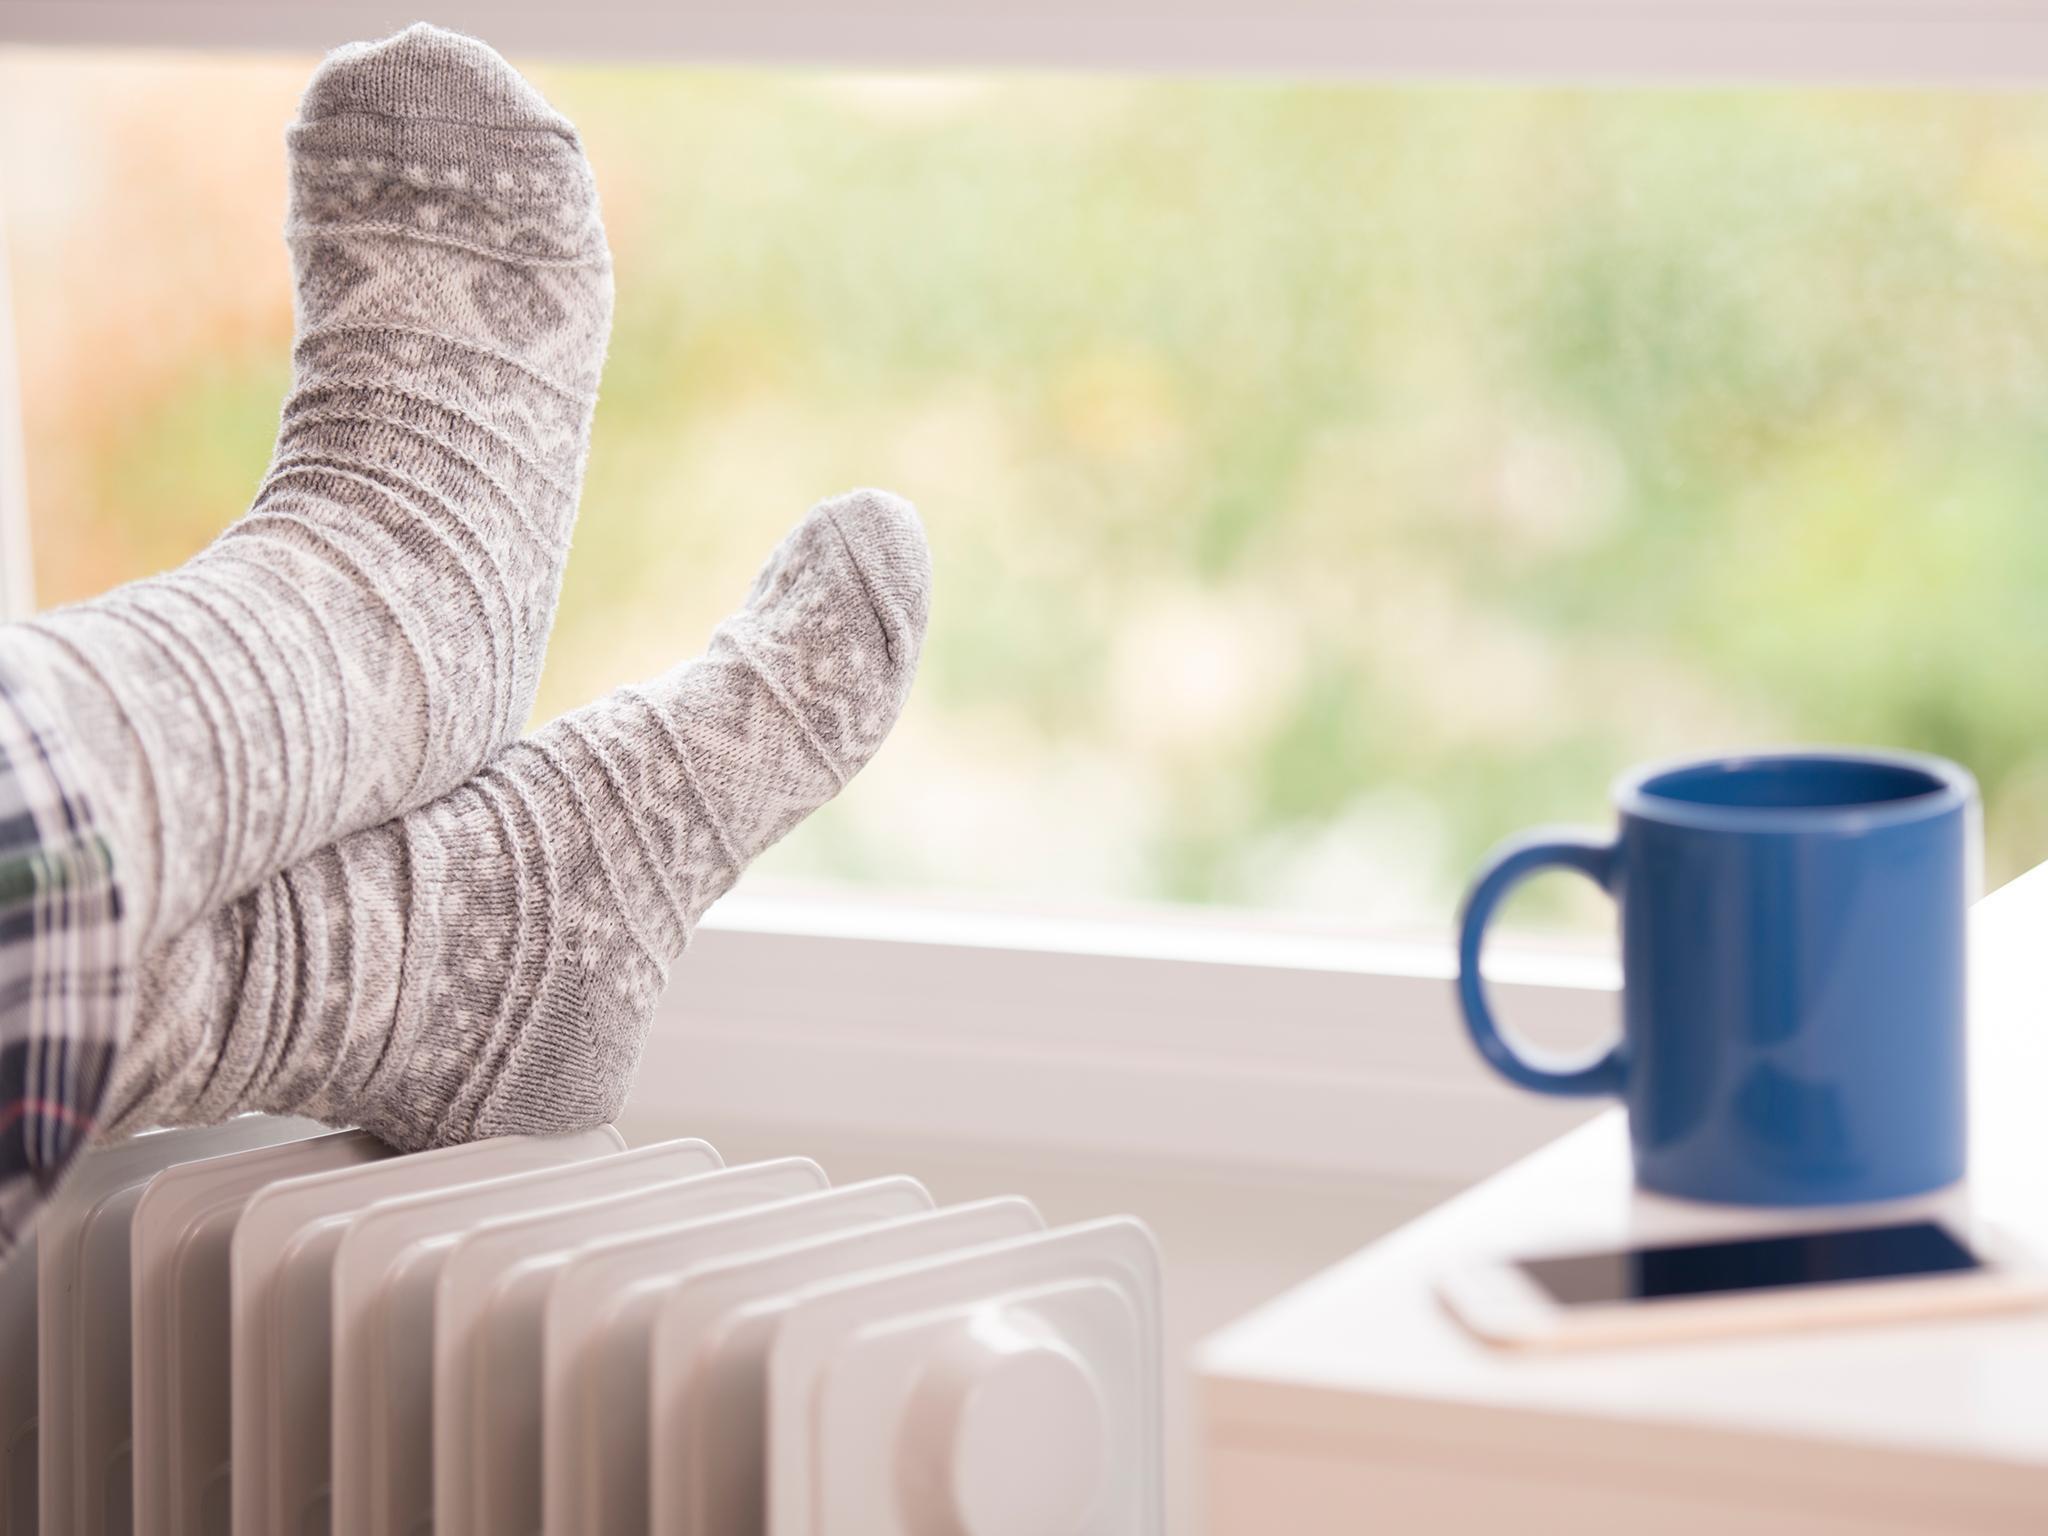 Heating networks can be better for the environment because they deliver lower carbon emissions